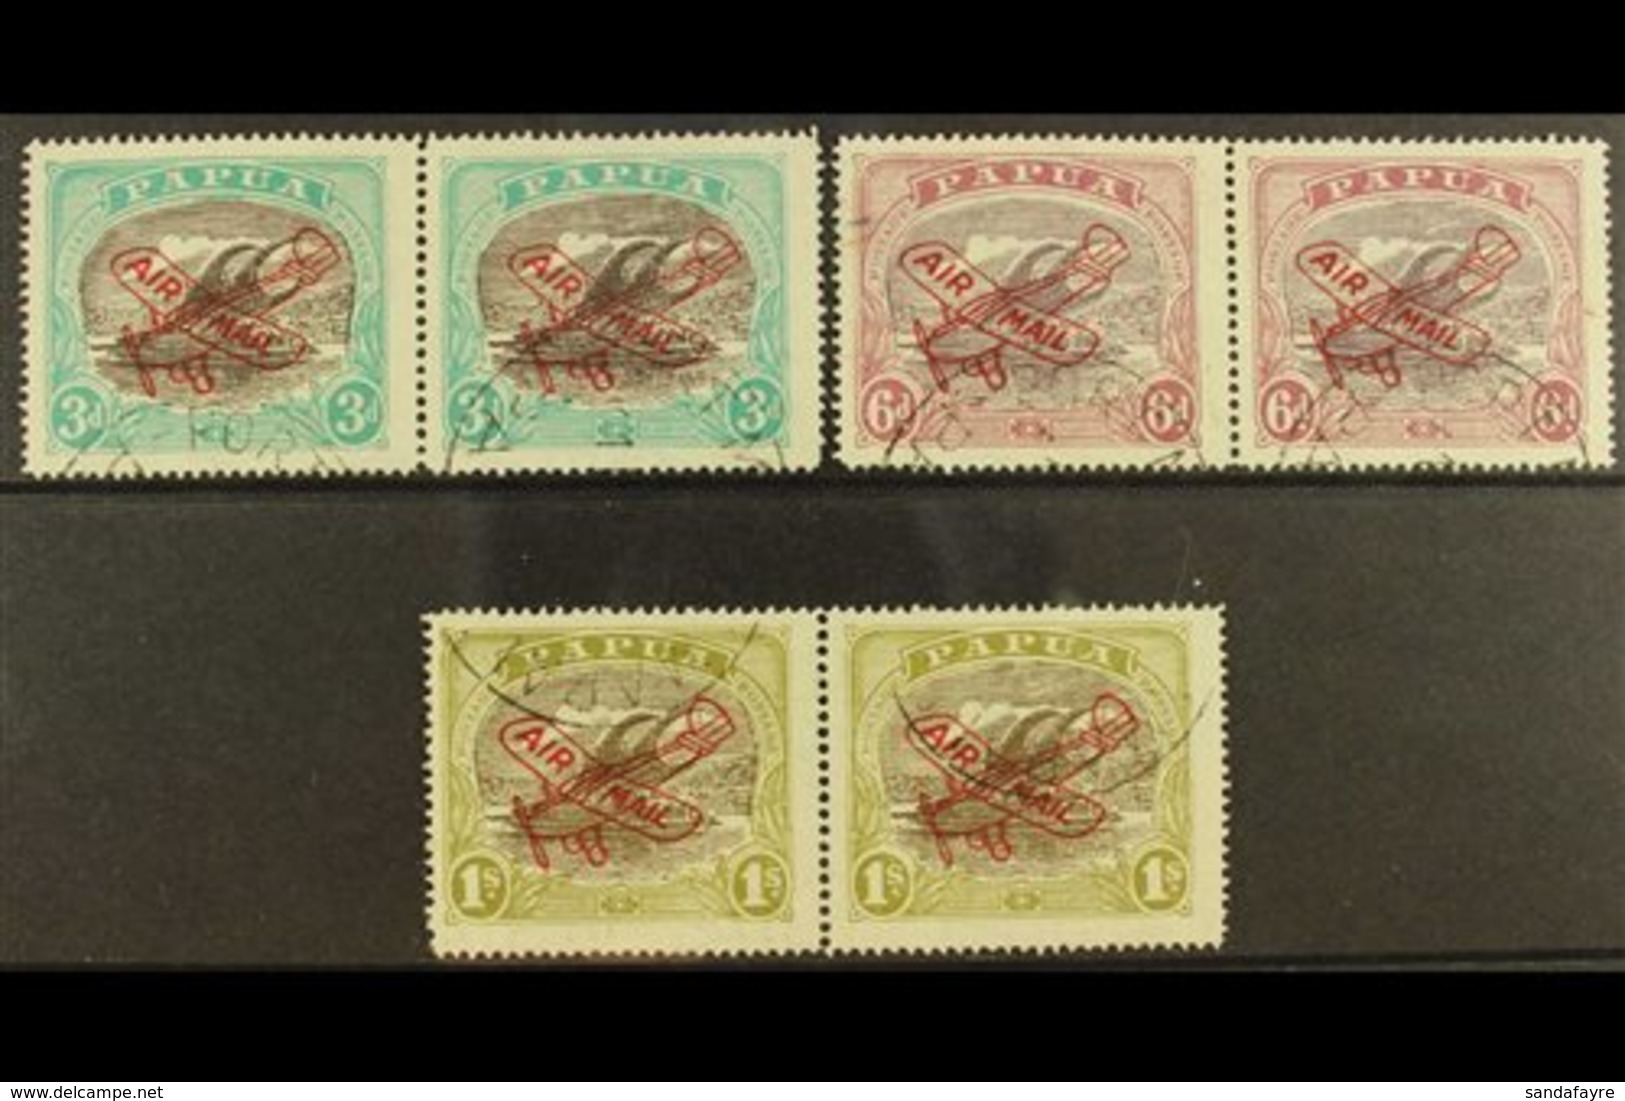 1930 Air Set, Ash Printing, SG 118-120, Each In A Horizontal Pair With One In Each Showing RIFT IN CLOUD, Fine Cds Used. - Papua-Neuguinea